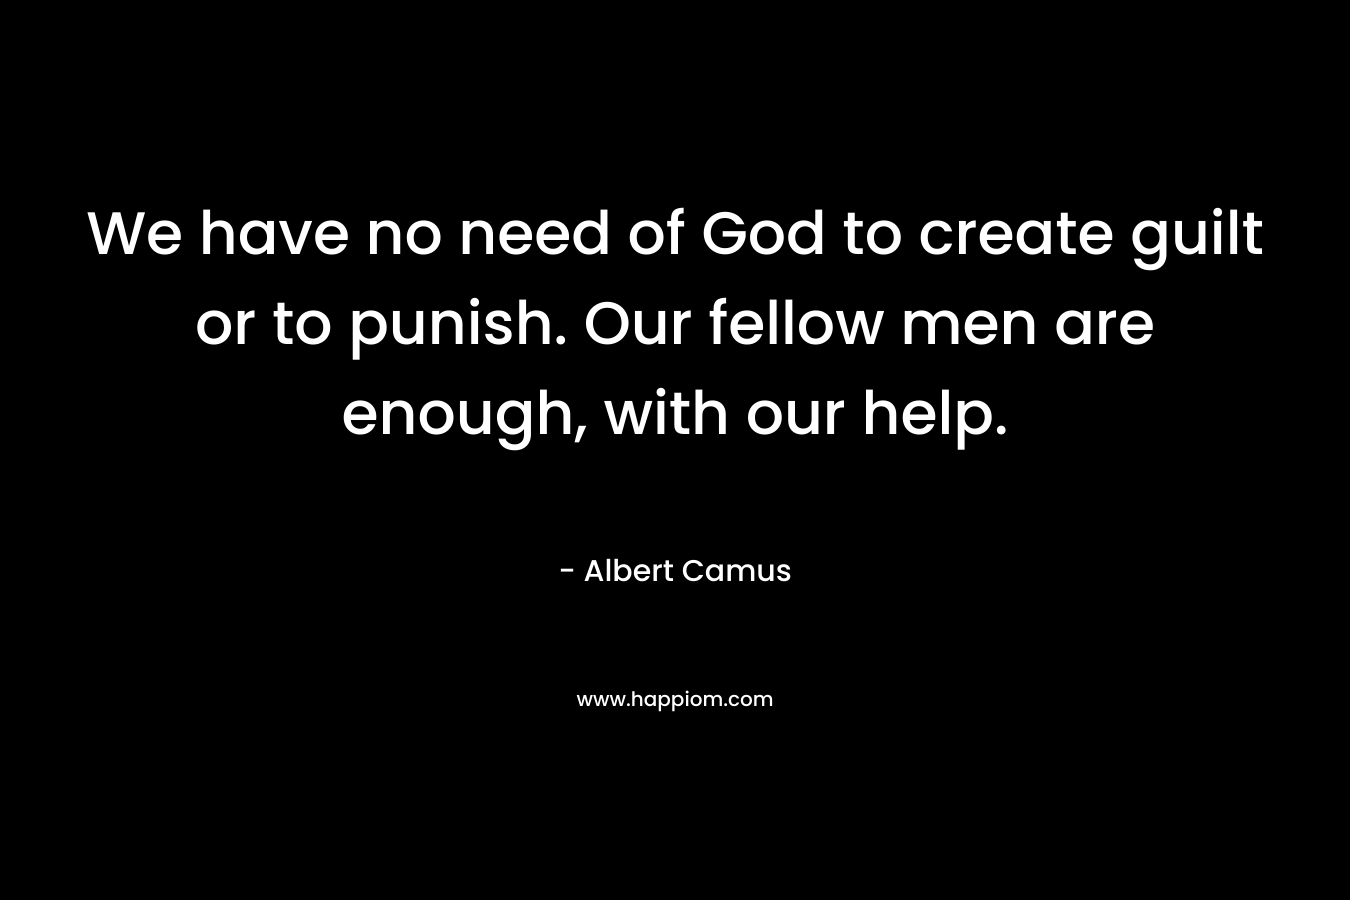 We have no need of God to create guilt or to punish. Our fellow men are enough, with our help. – Albert Camus